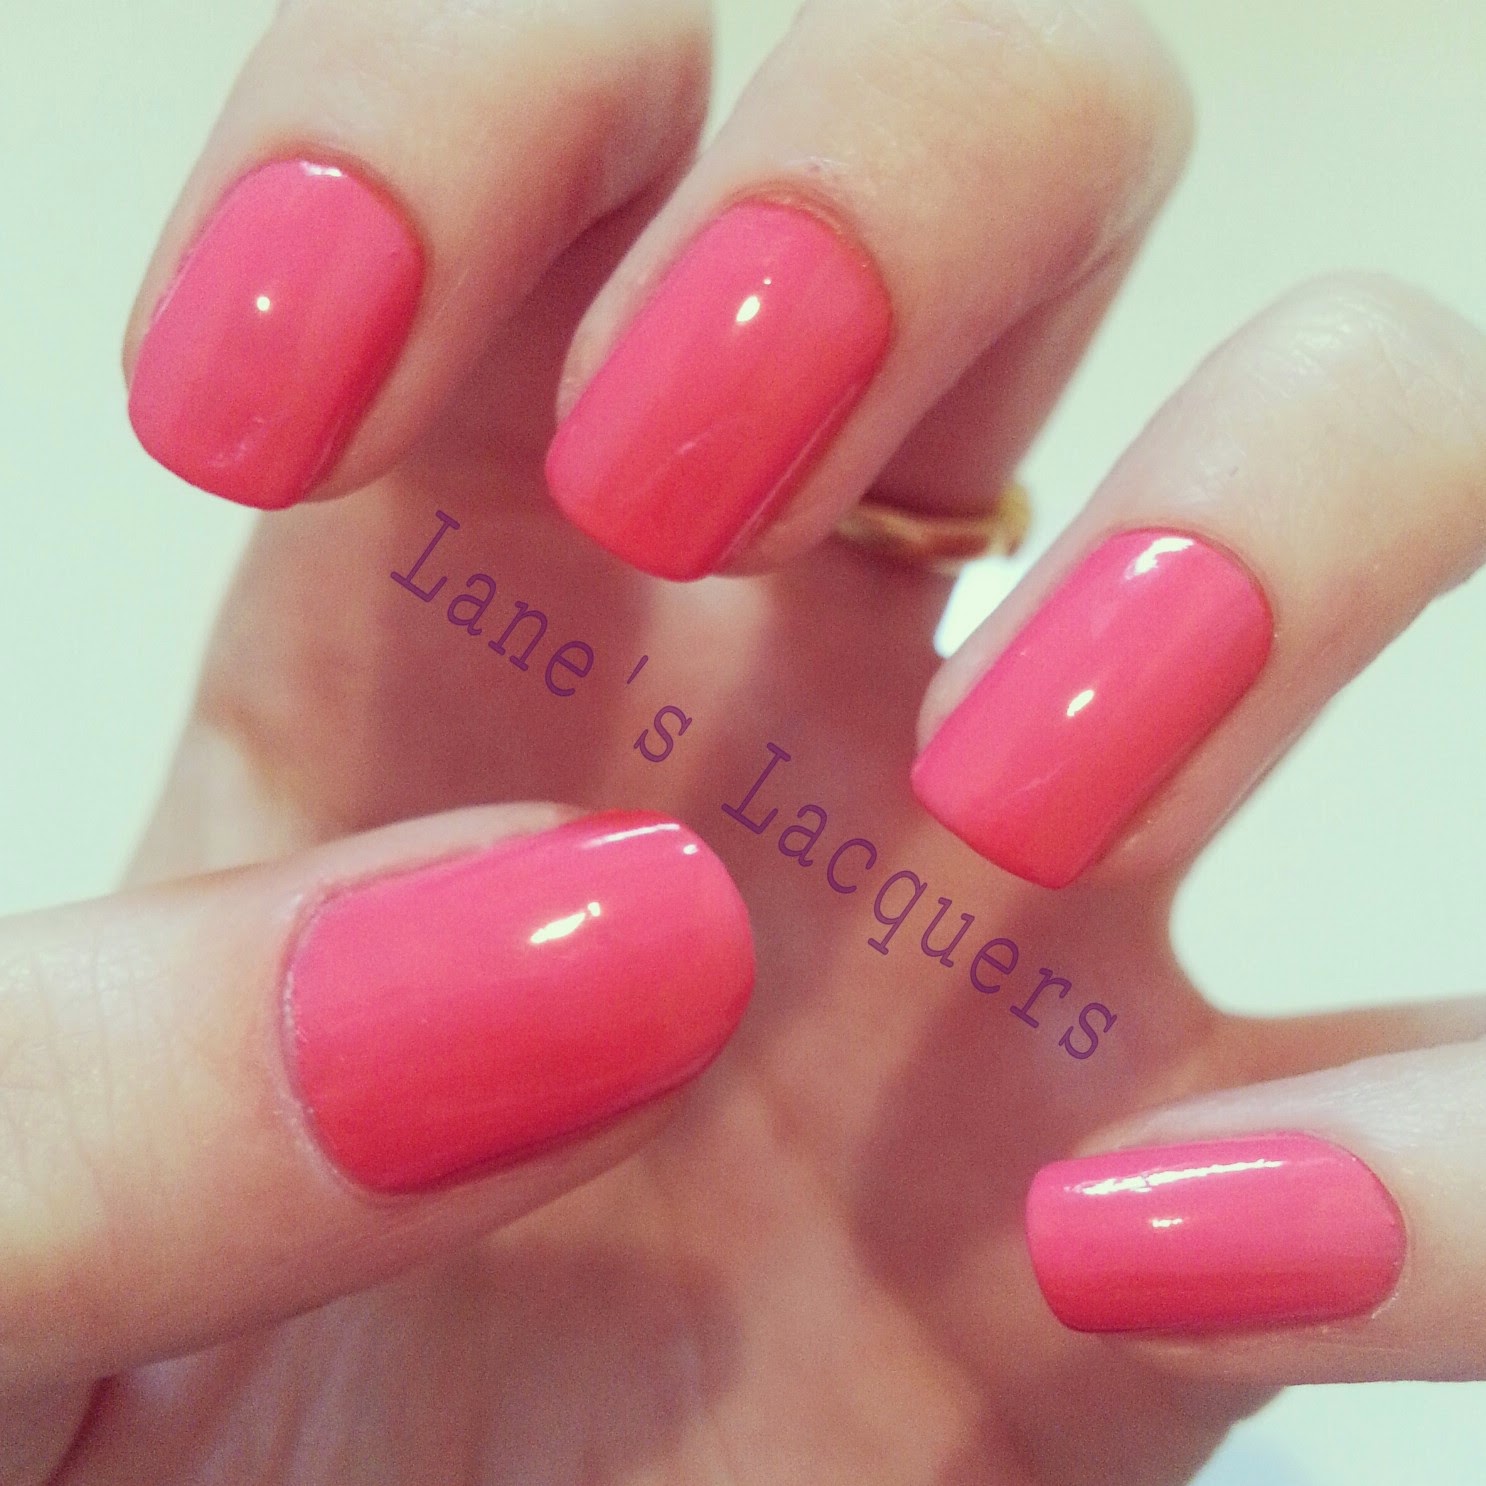 Lane's Lacquers: *NEW* Models Own Summer Hypergels!